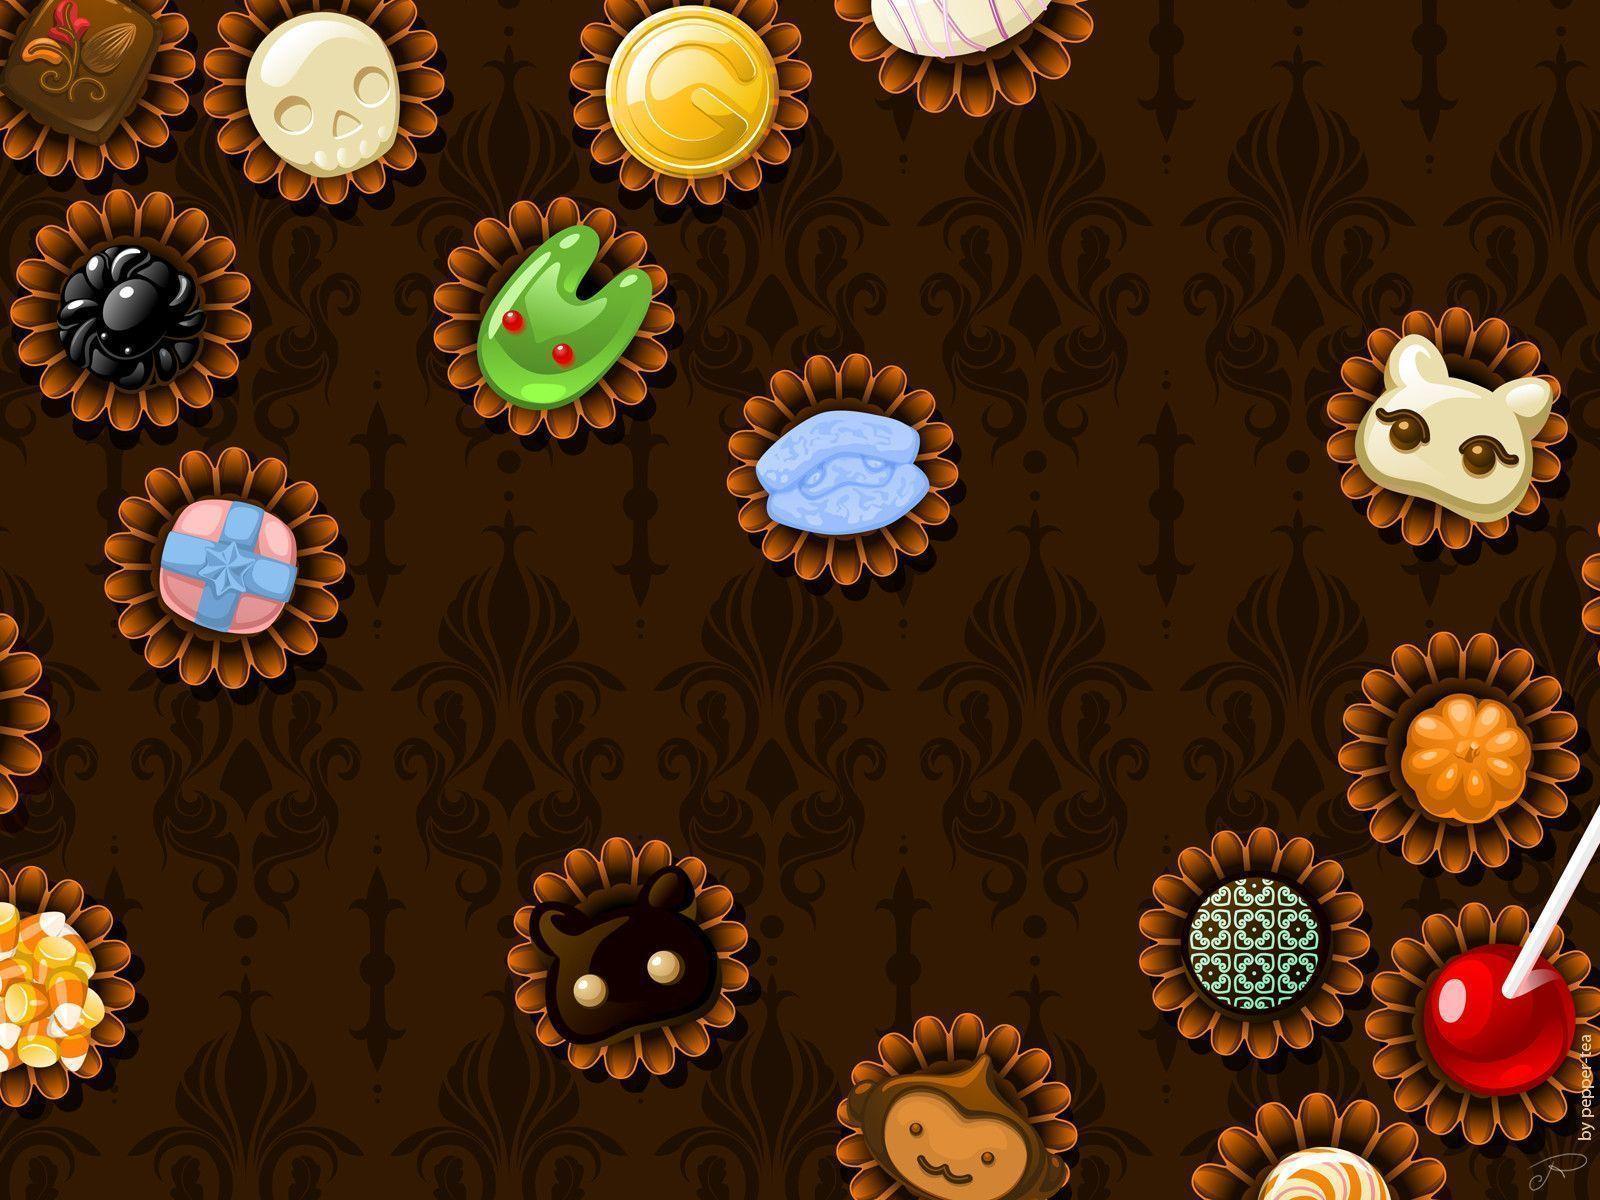 Gaia Wallpaper: Wall Of Candy By Pepper Tea